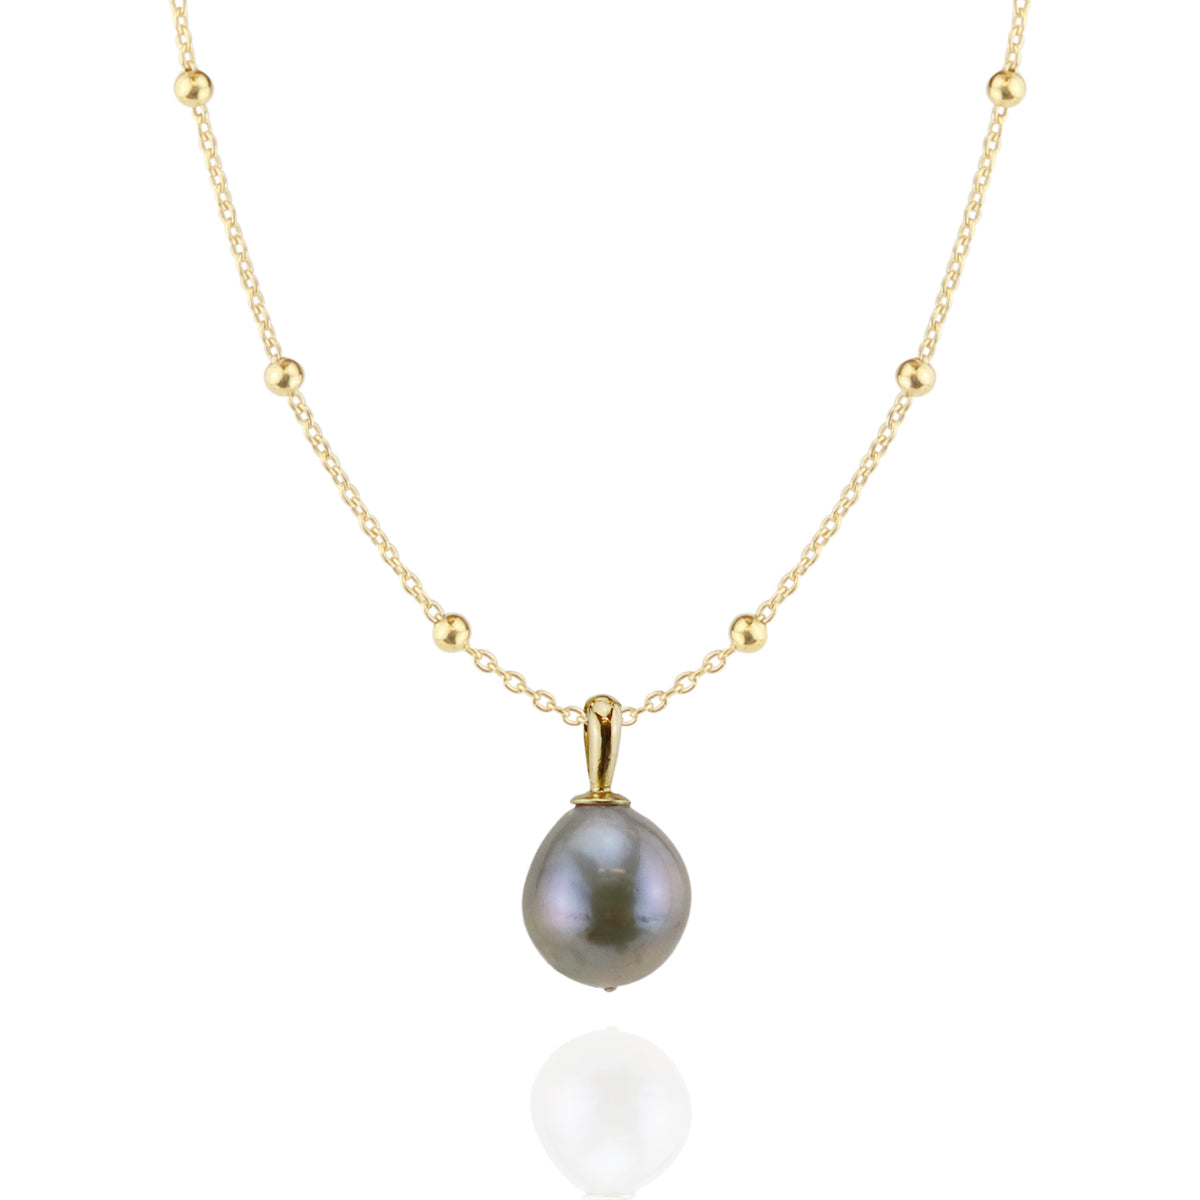 Peacock Baroque Pearl Pendant with Satellite Chain